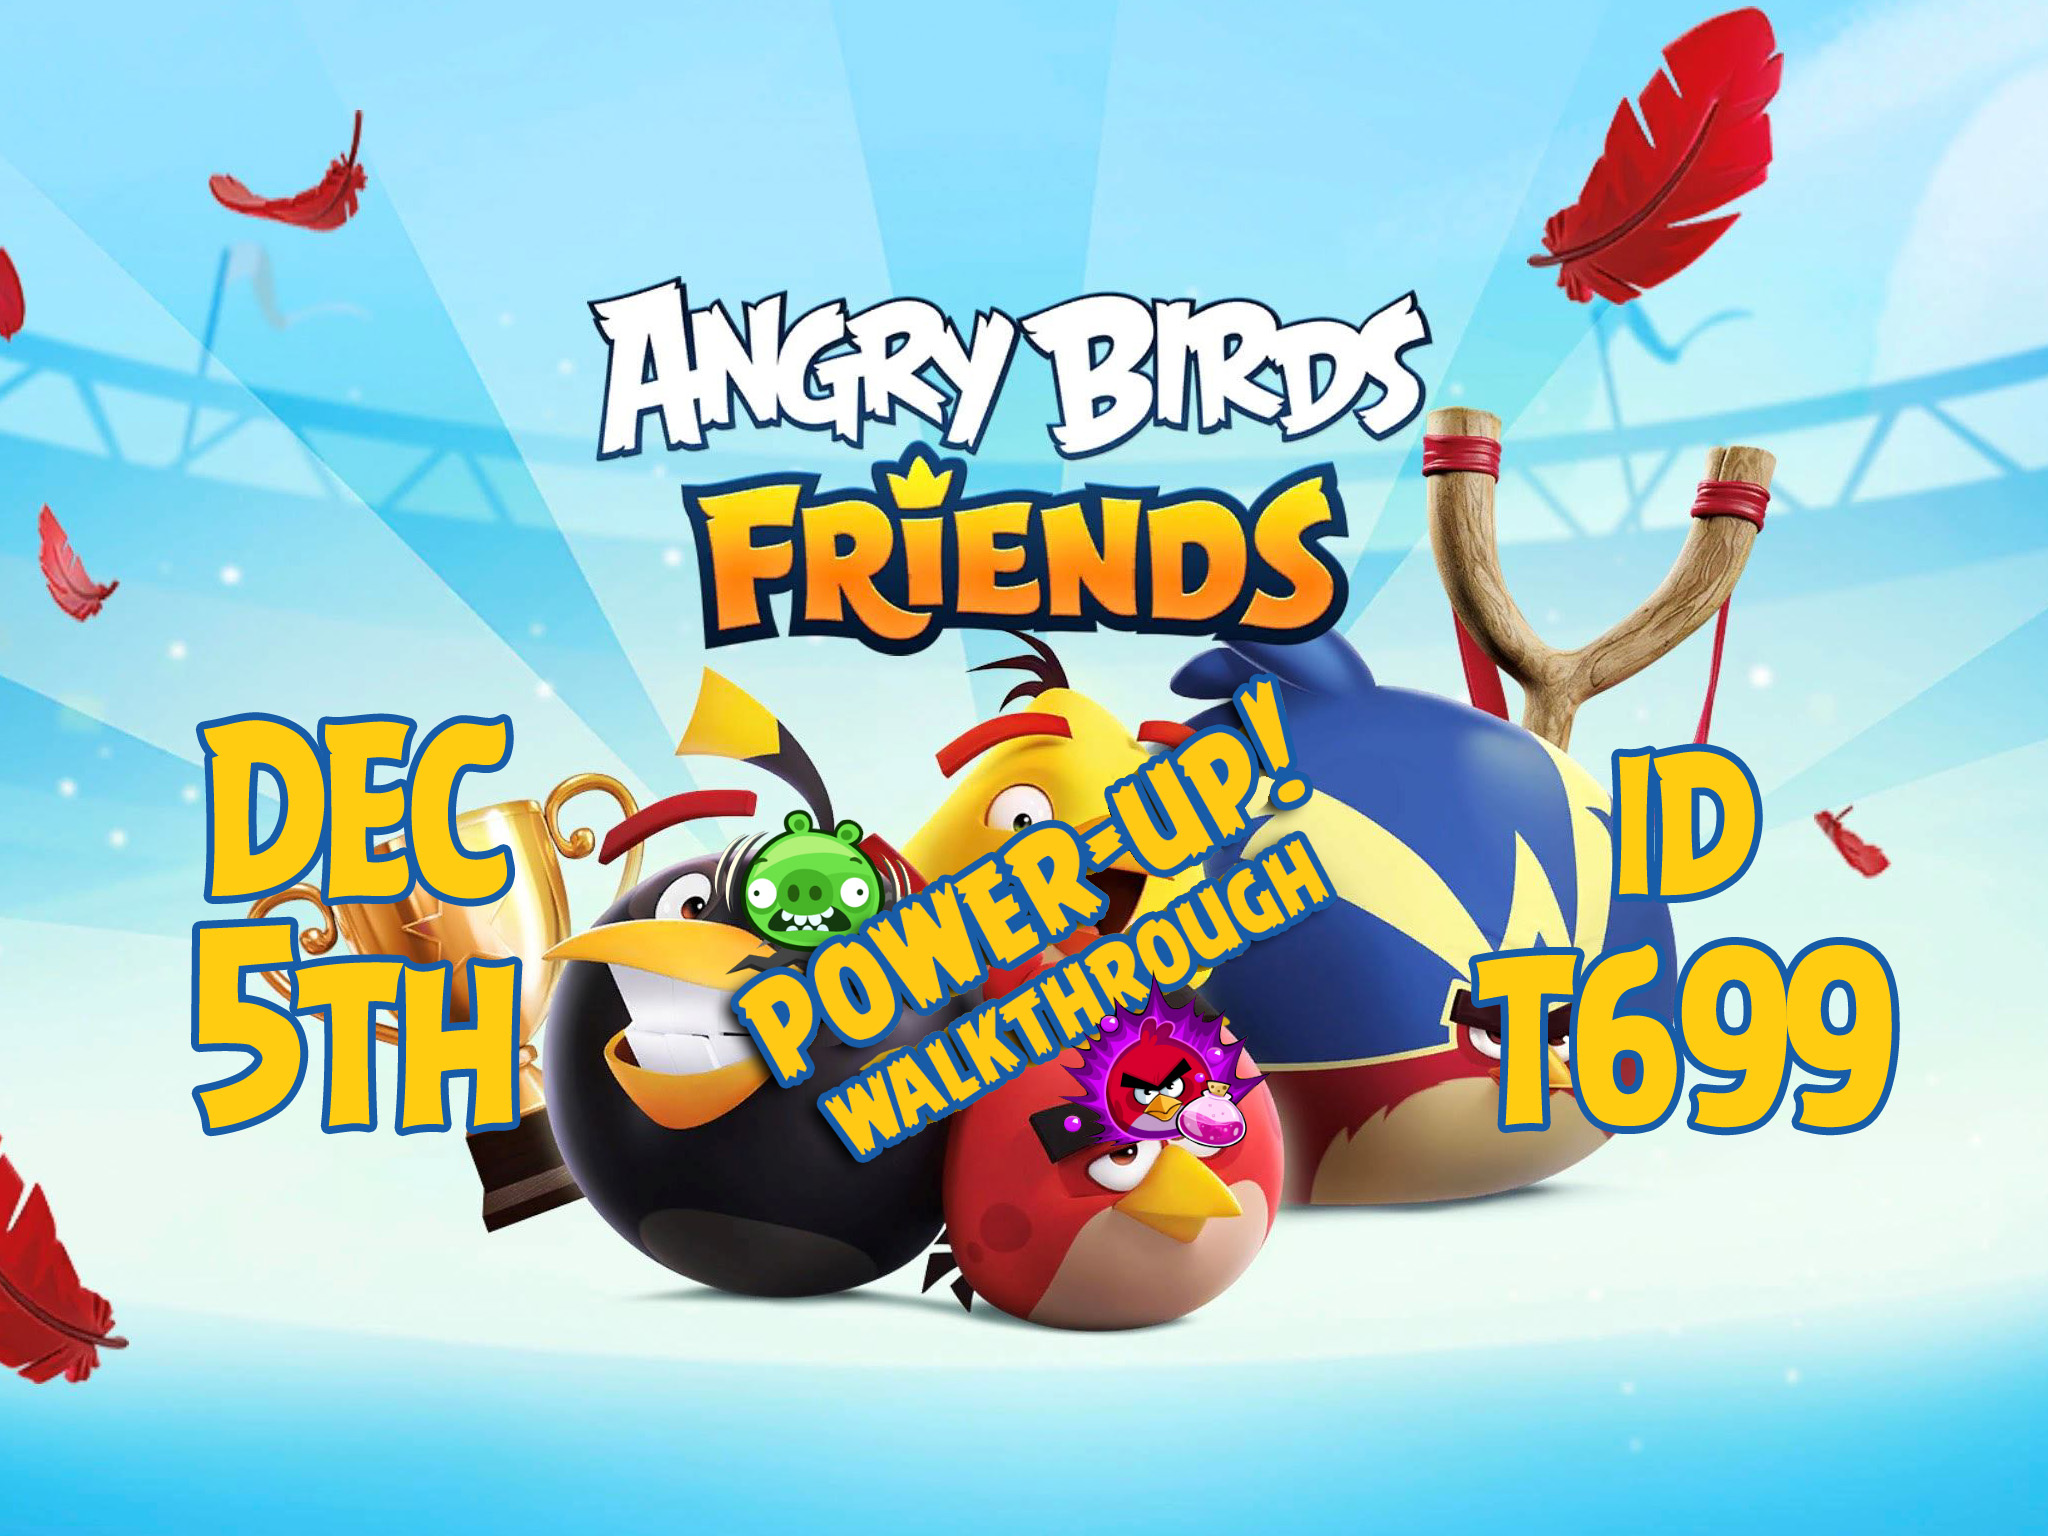 Angry-Birds-Friends-Tournament-T699-Feature-Image-PU